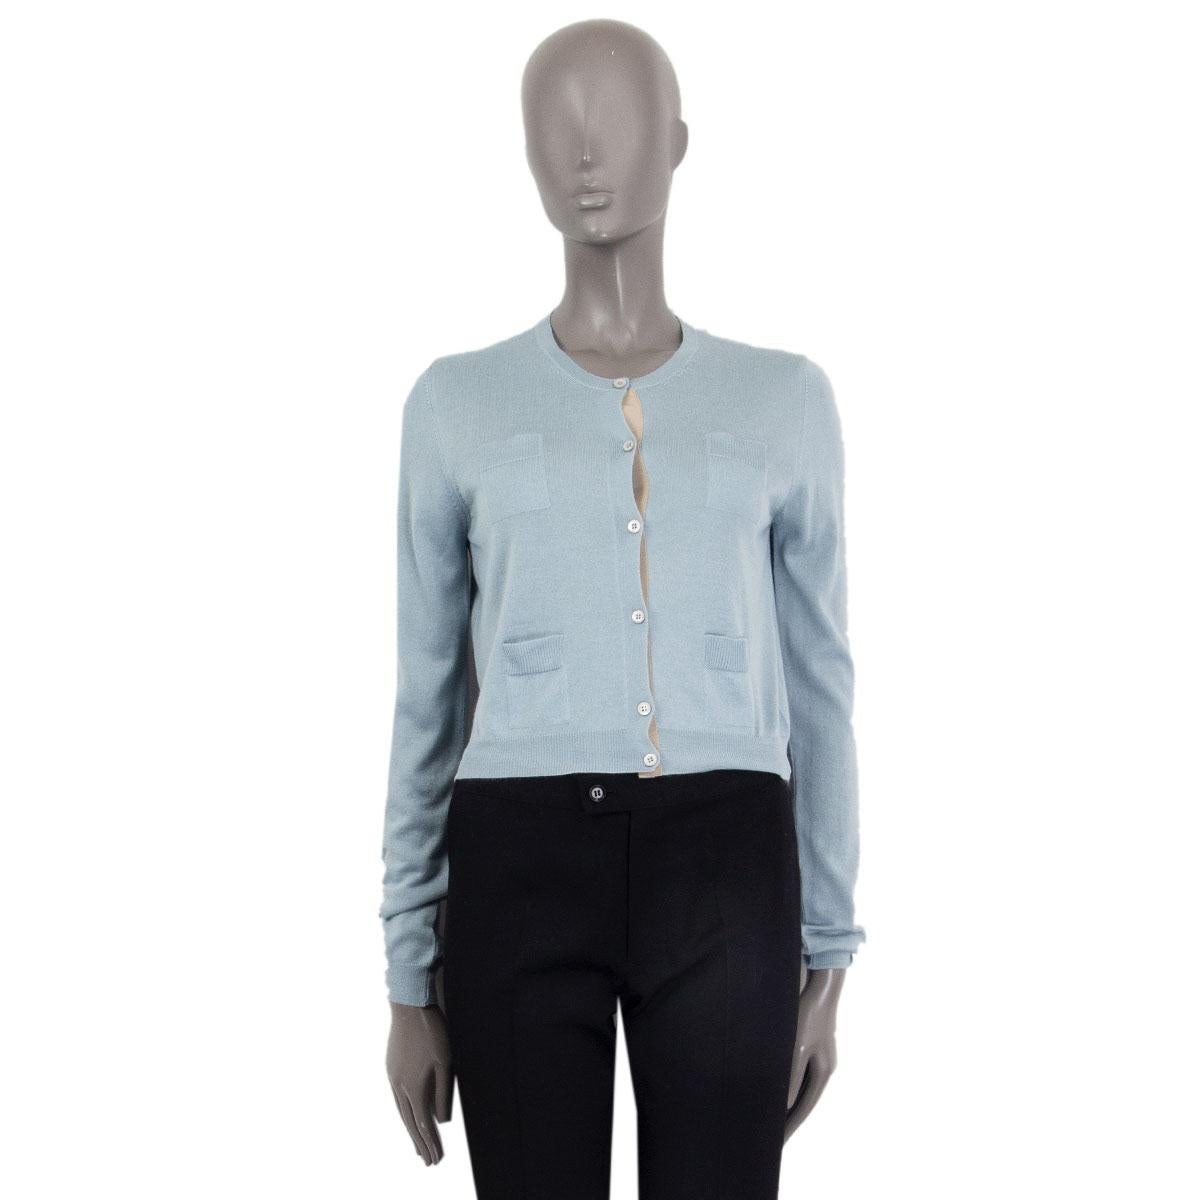 Prada cropped button-up cardigan in pale blue cashmere (70%) and silk (30%) with pale beige button tape and four patch pockets. Has been worn and is in excellent condition. 

Tag Size 42
Size M
Shoulder Width 39cm (15.2in)
Bust 96cm (37.4in)
Waist